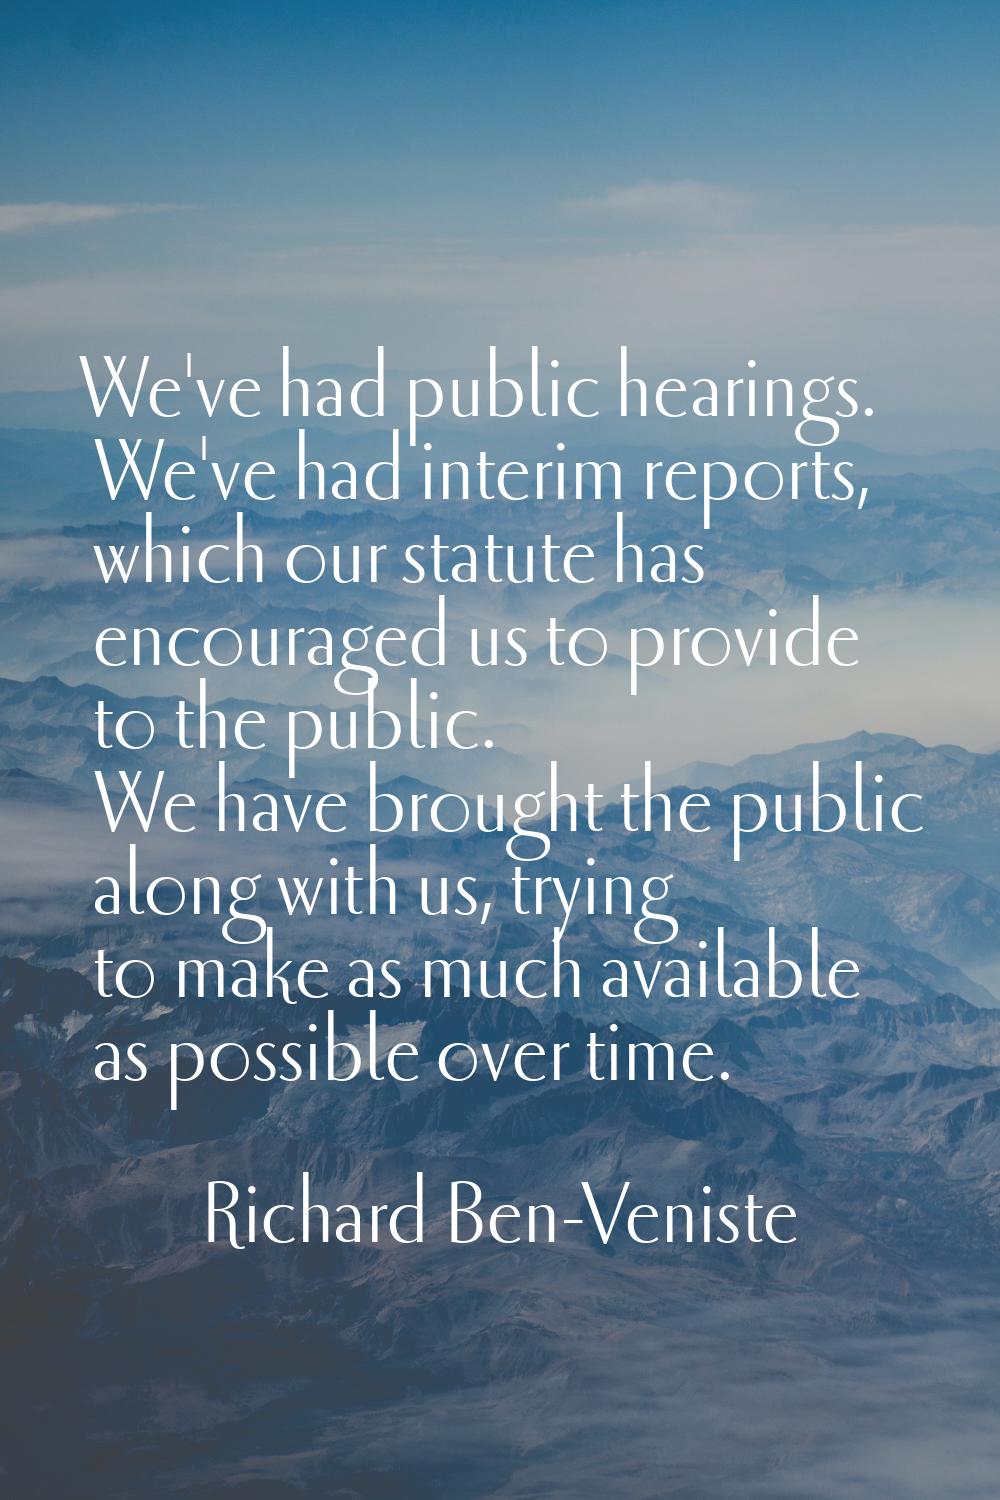 We've had public hearings. We've had interim reports, which our statute has encouraged us to provid